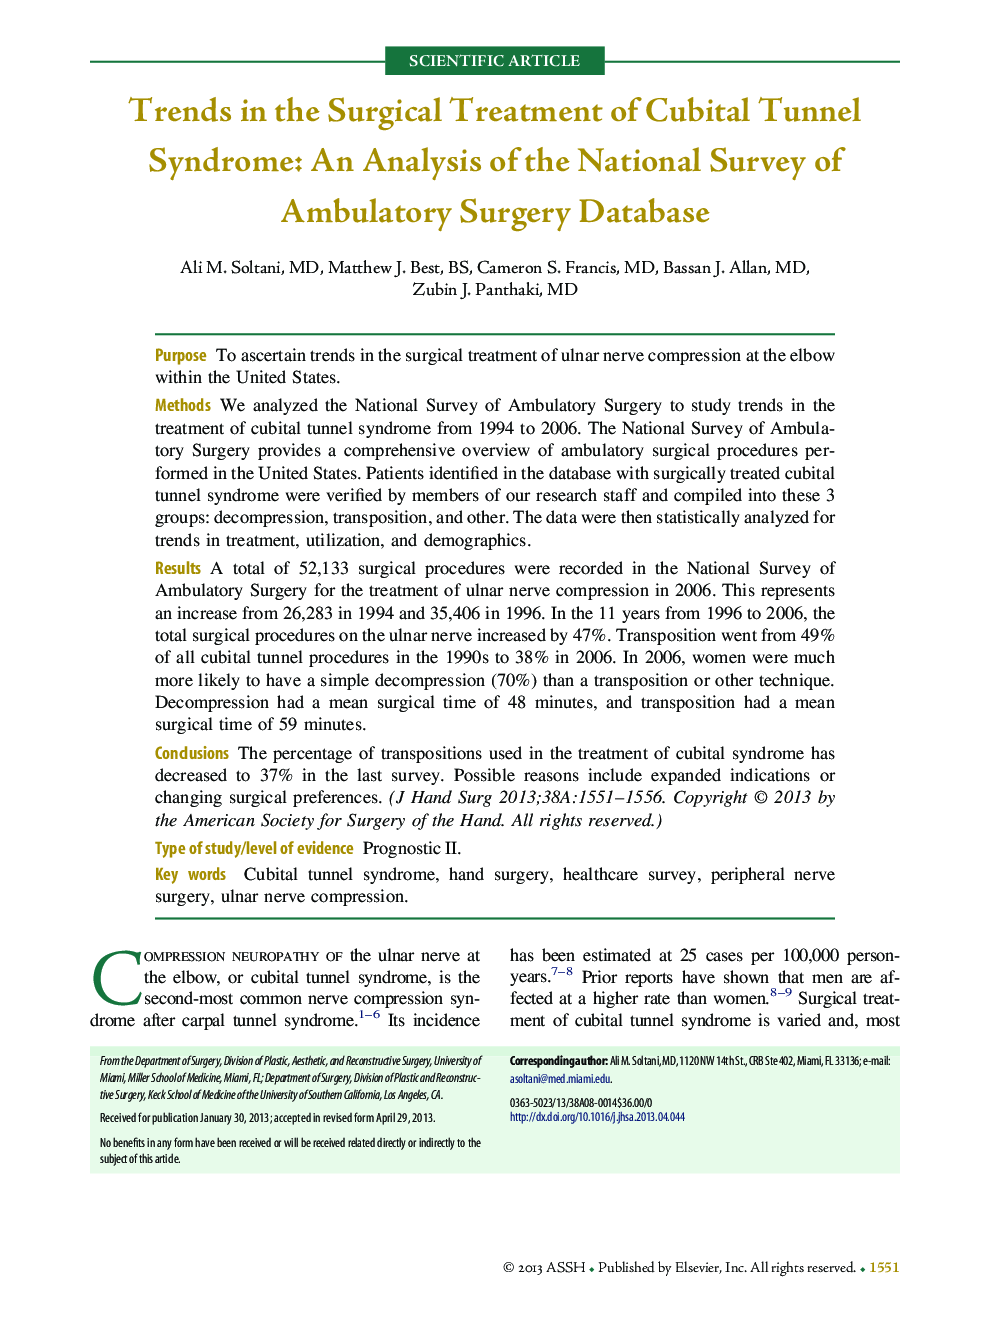 Trends in the Surgical Treatment of Cubital Tunnel Syndrome: An Analysis of the National Survey of Ambulatory Surgery Database 